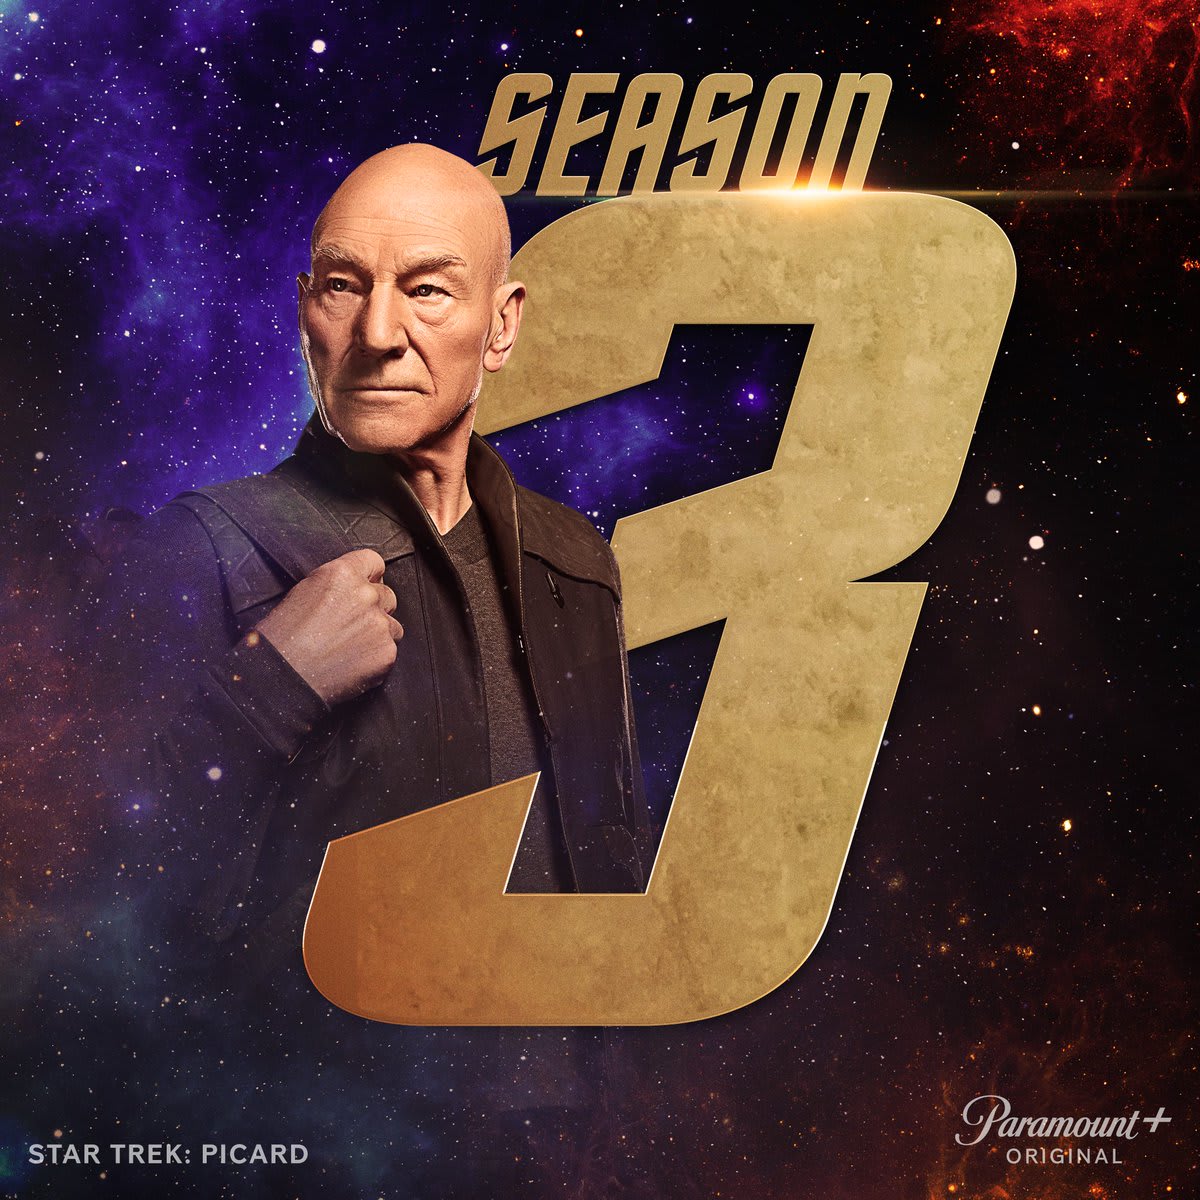 [Ongoing thread] Star Trek Picard: Season 3 (2023) Patrick Stewart: “We wrapped season two at 7 p.m. one night and we started the next season the following morning. It’s been, as you may be able to hear from my voice, an intense experience.”